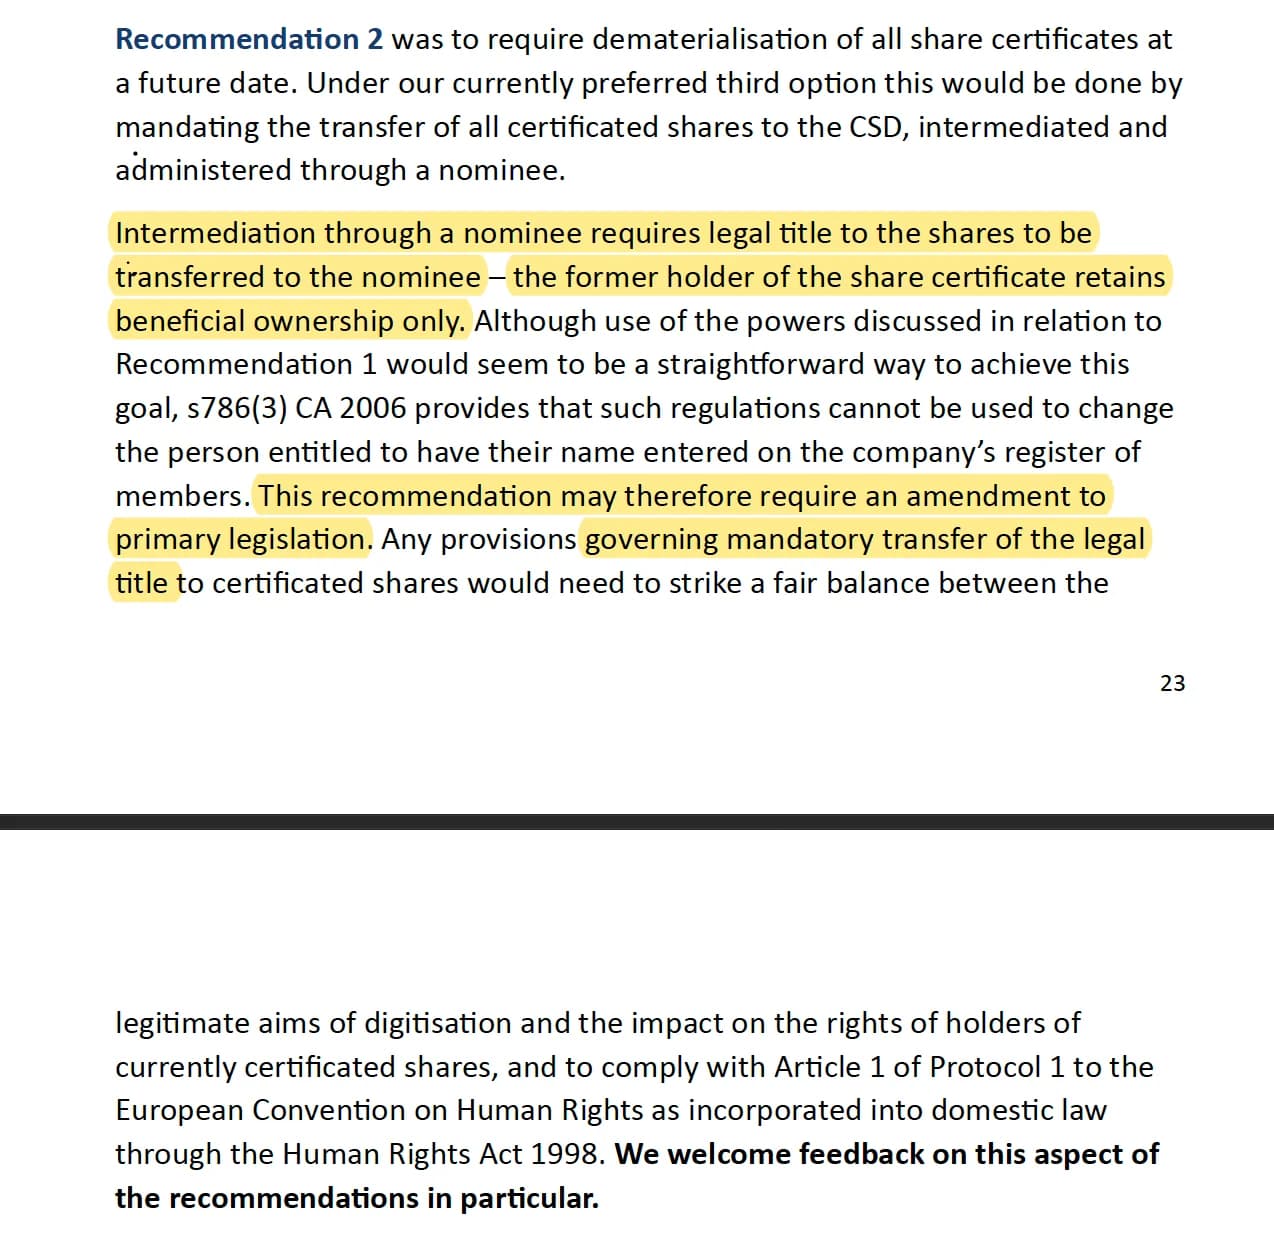 SCREENSHOT FROM UK DIGITISATION PROPOSAL ADVOCATING FOR LEGAL TRANSFER OF SHARE OWNERSHIP